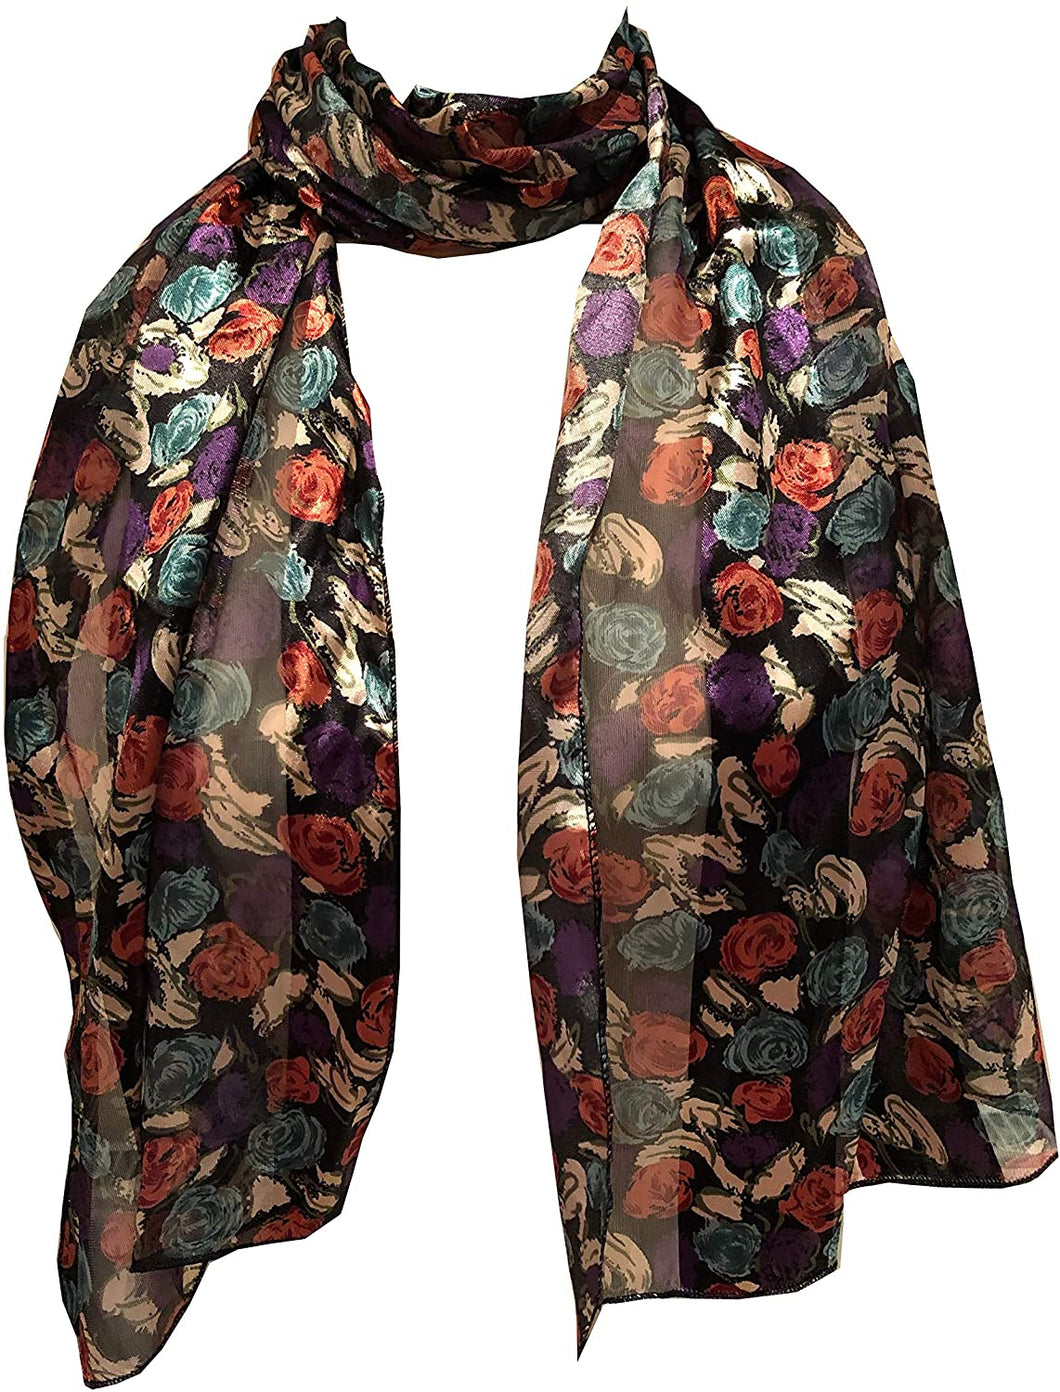 Pamper Yourself Now Black with Green, Purple and Pink Small Roses Scarf Shiny Thin Pretty Scarf